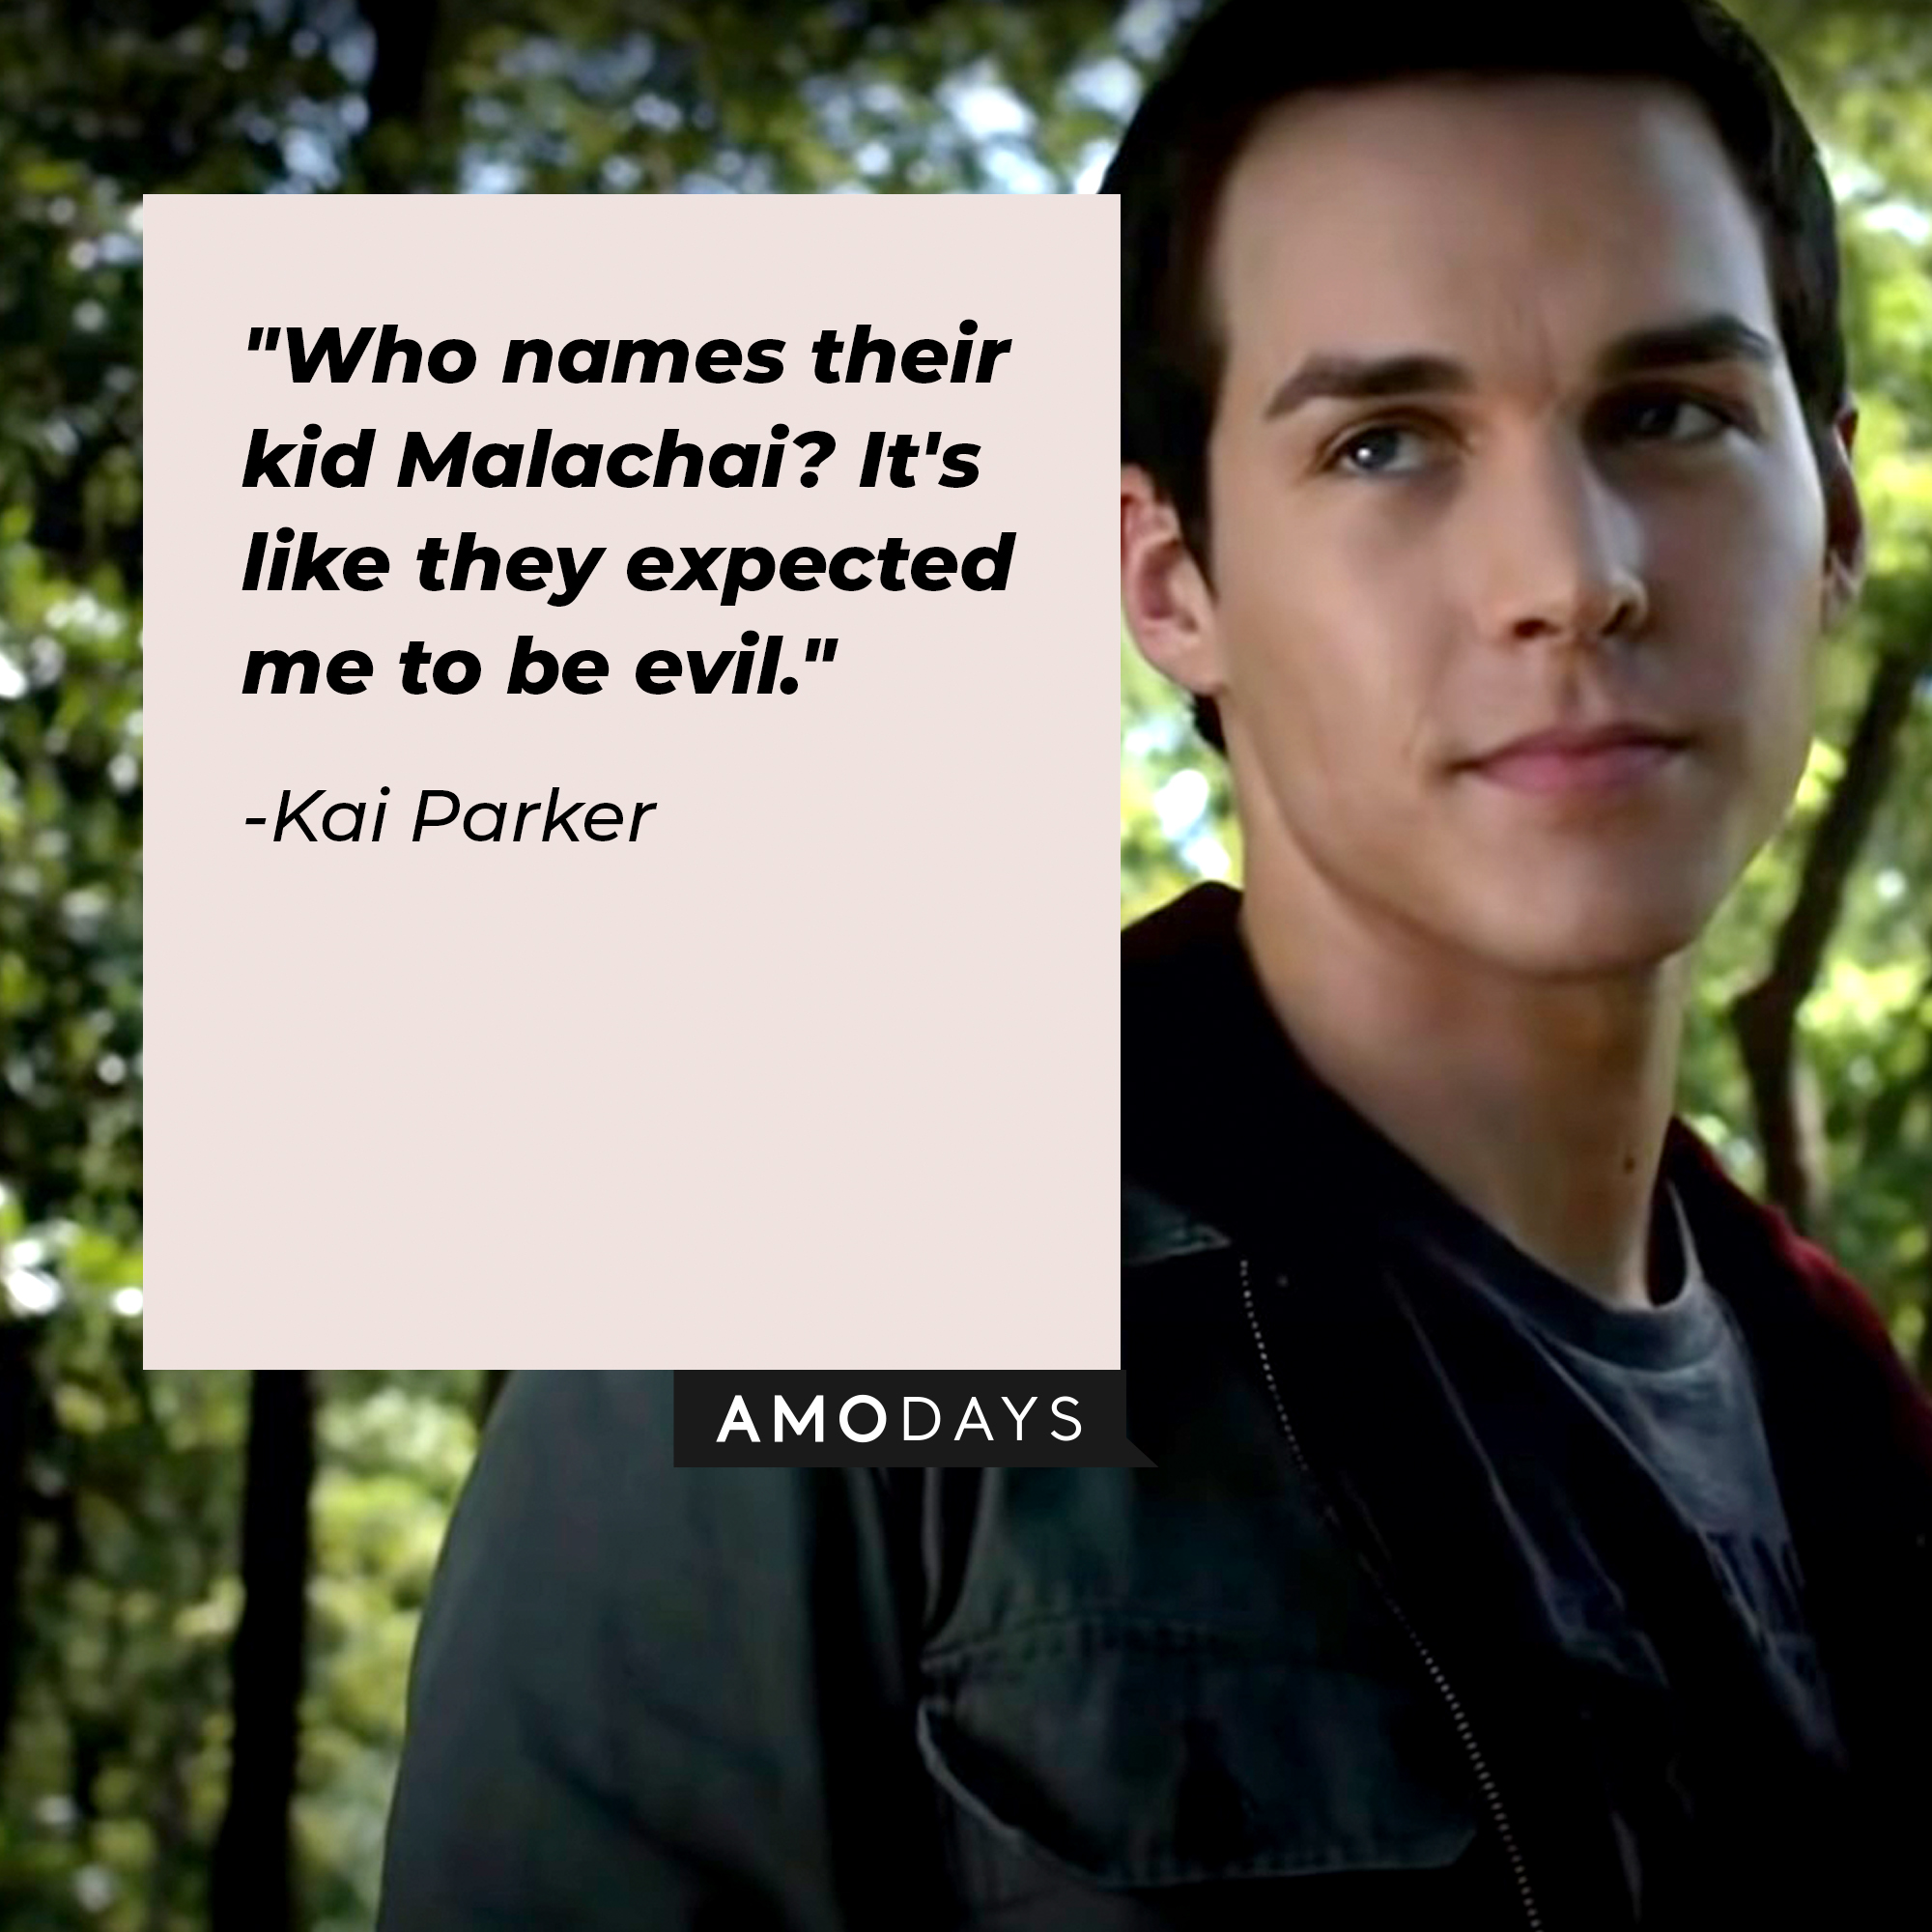 Kai Parker's quote: "Who names their kid Malachai? It's like they expected me to be evil." | Source: Facebook.com/thevampirediaries